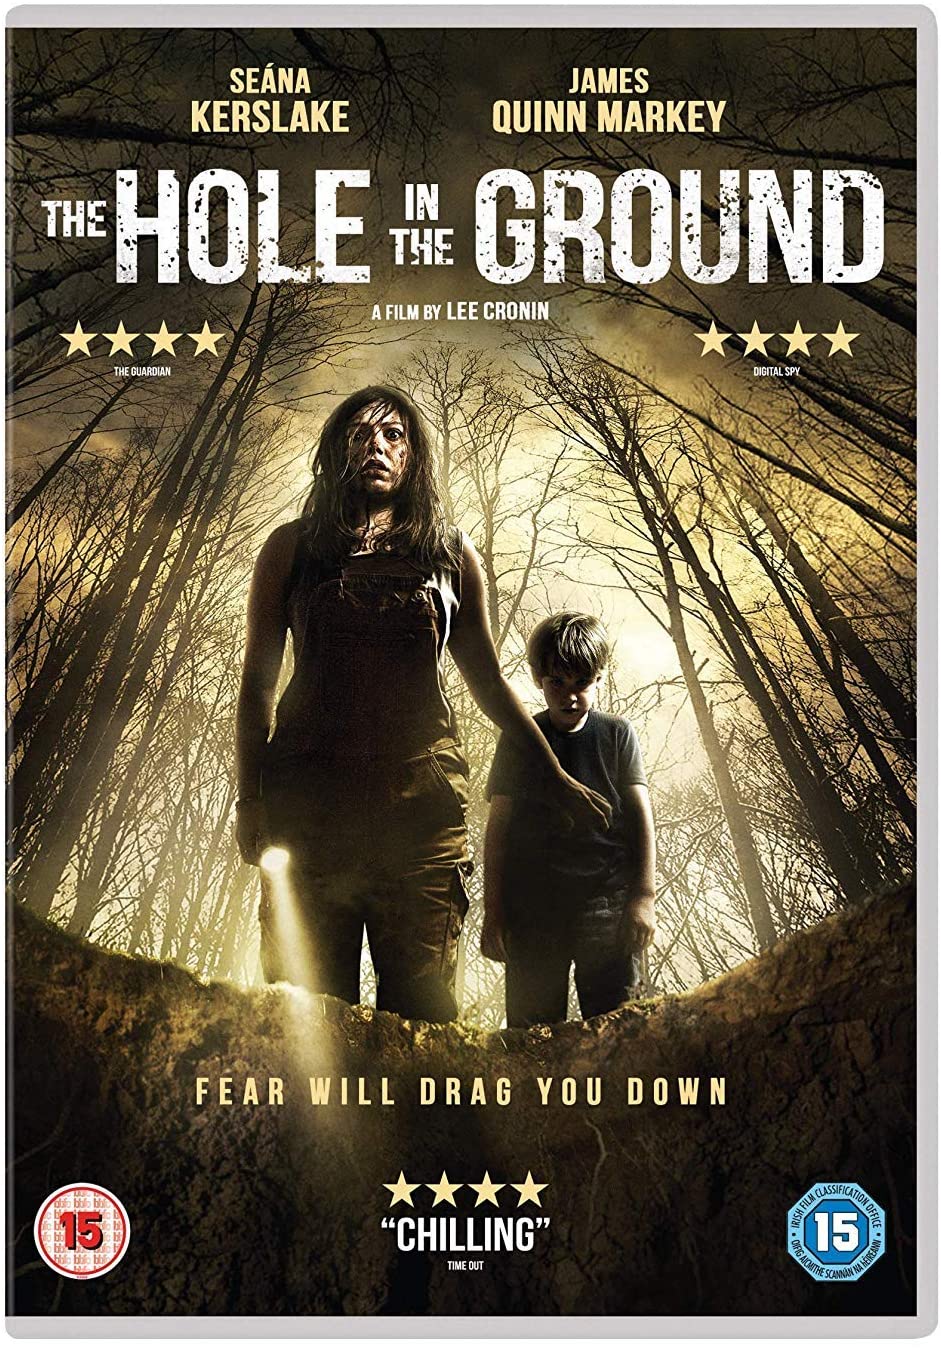 The Hole in the Ground - Horror/Thriller [DVD]